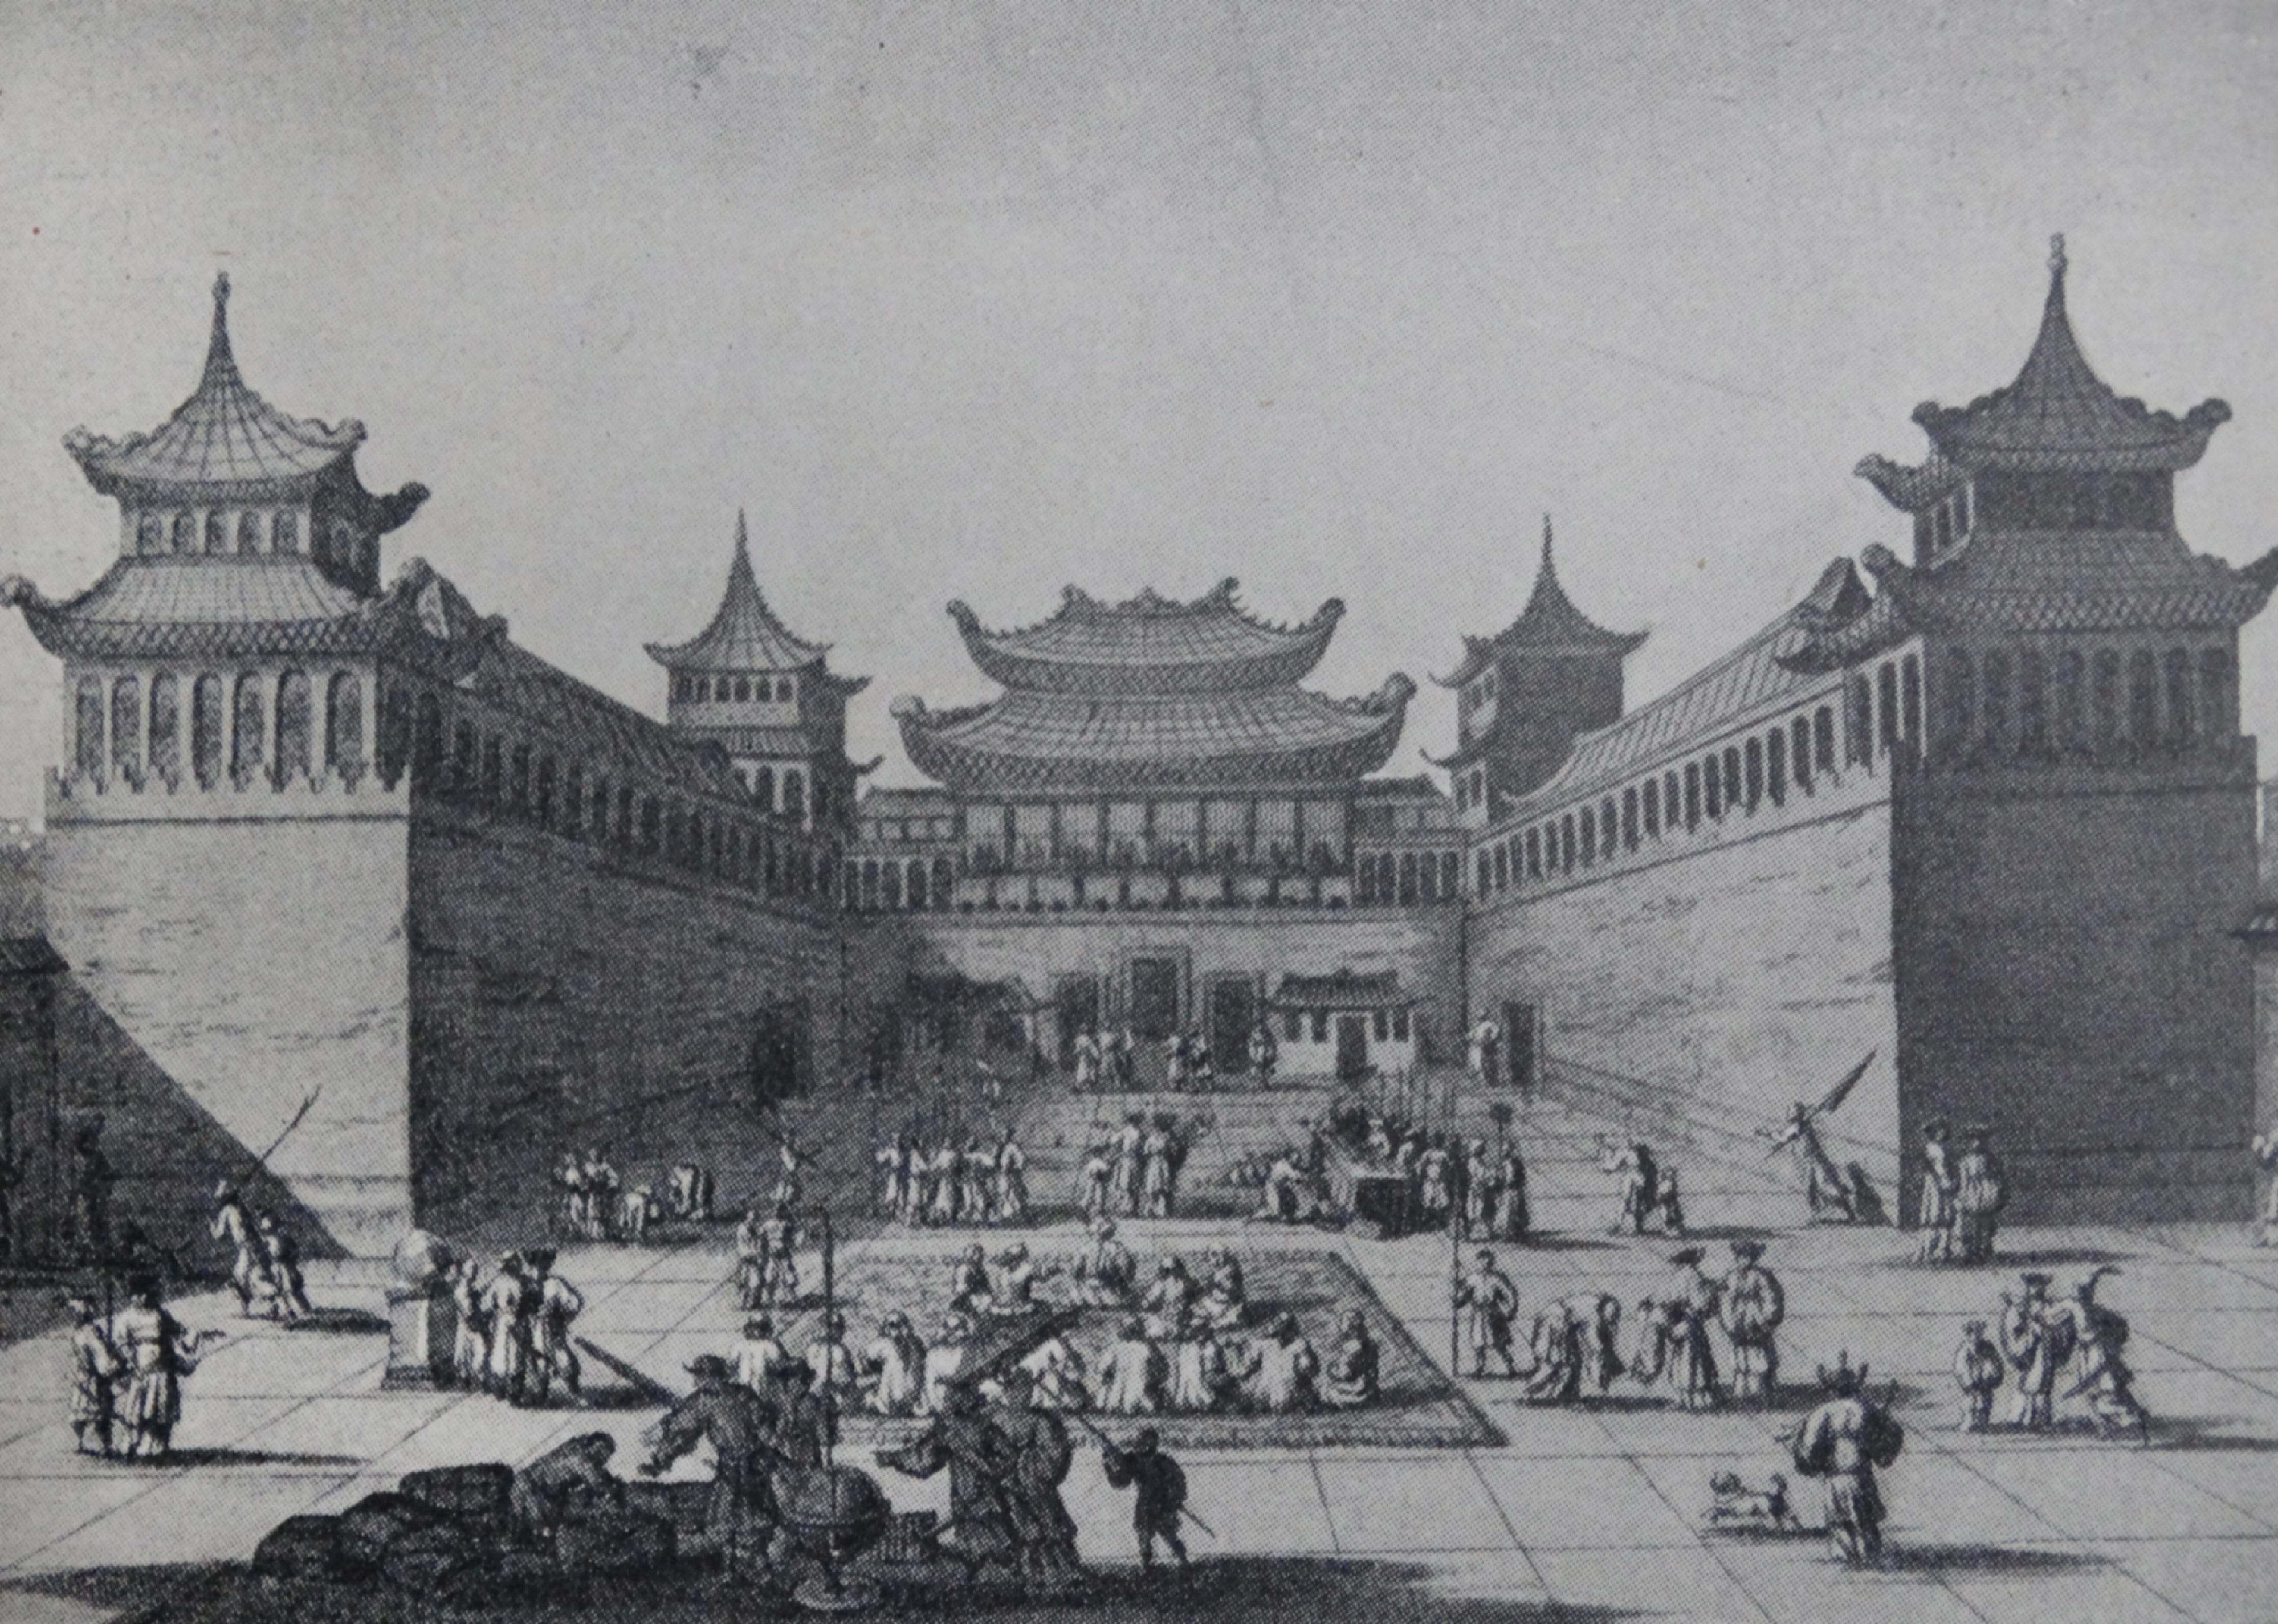 Dutch East India Company envoys received at the imperial palace in Beijing, 1600s.